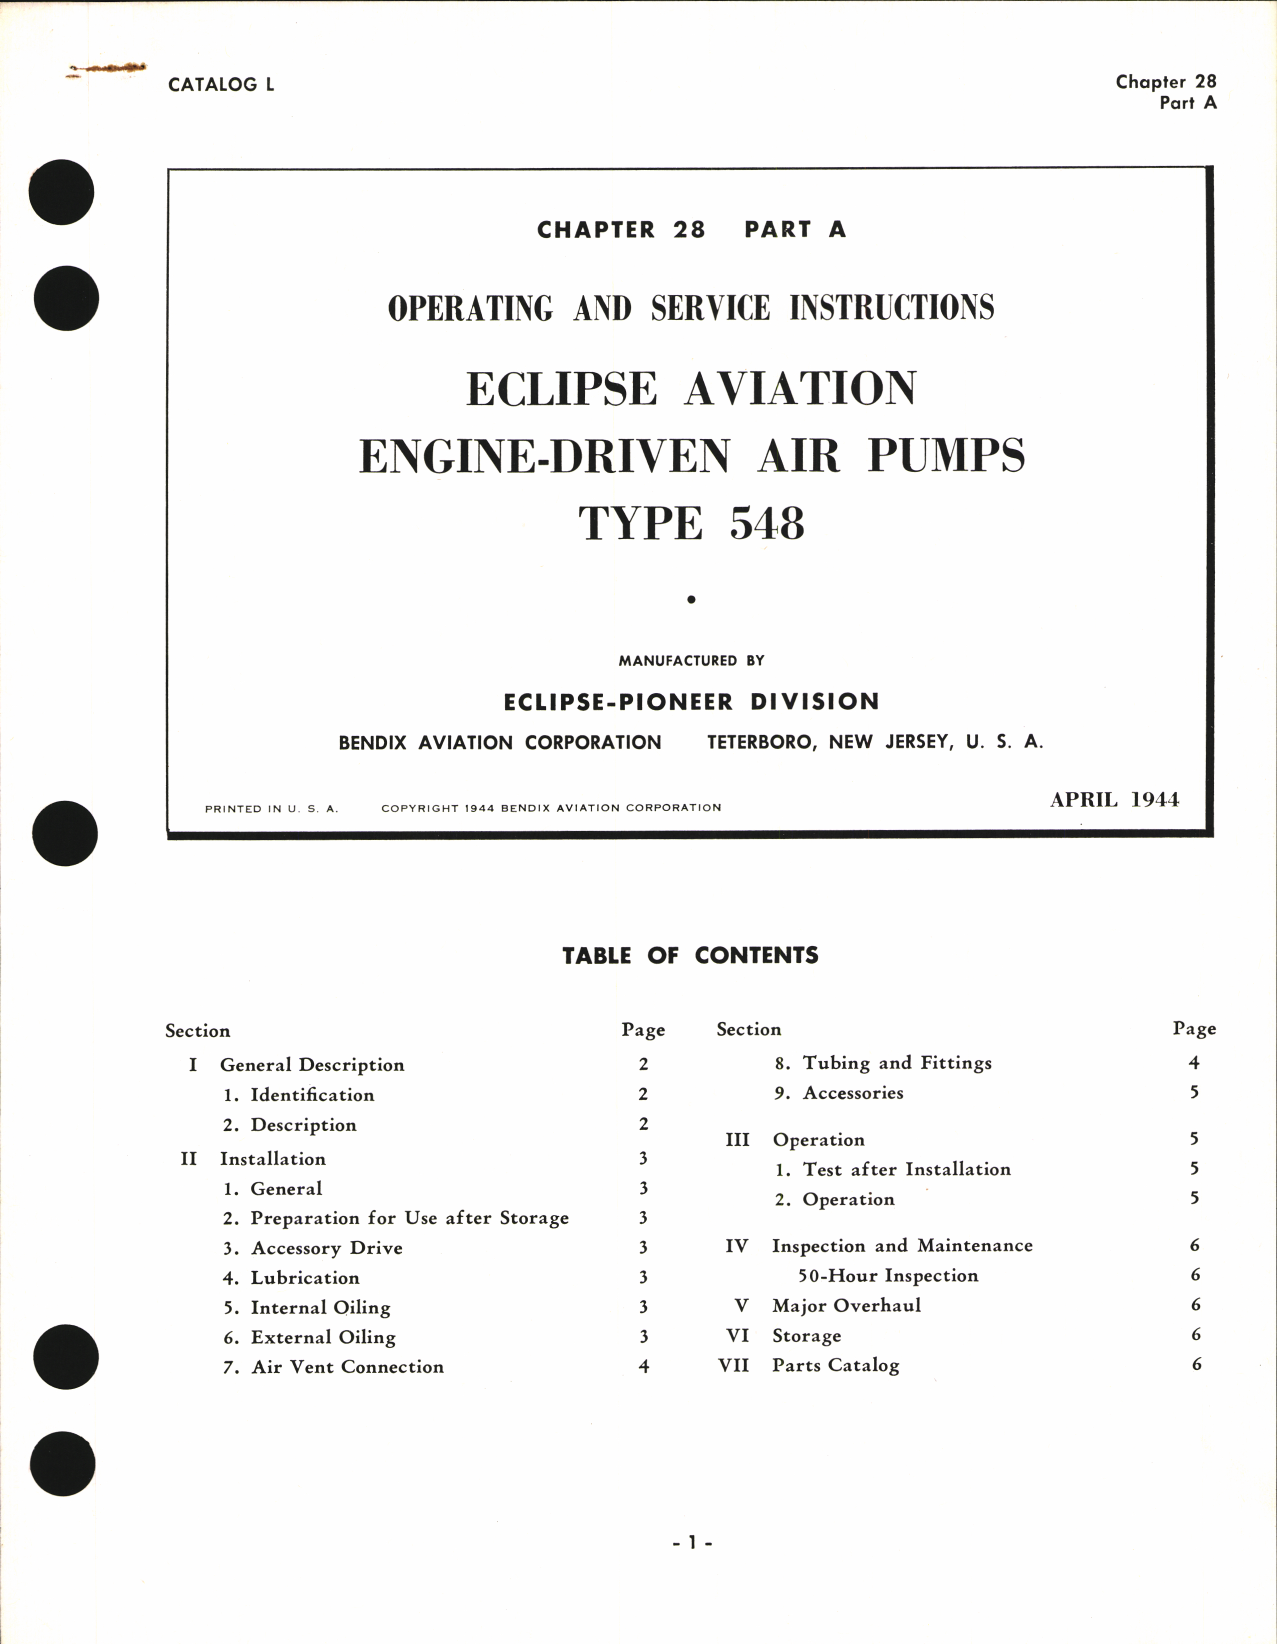 Sample page 1 from AirCorps Library document: Operating and Service Instructions for Eclipse Aviation Engine-Driven Air Pumps Type 548